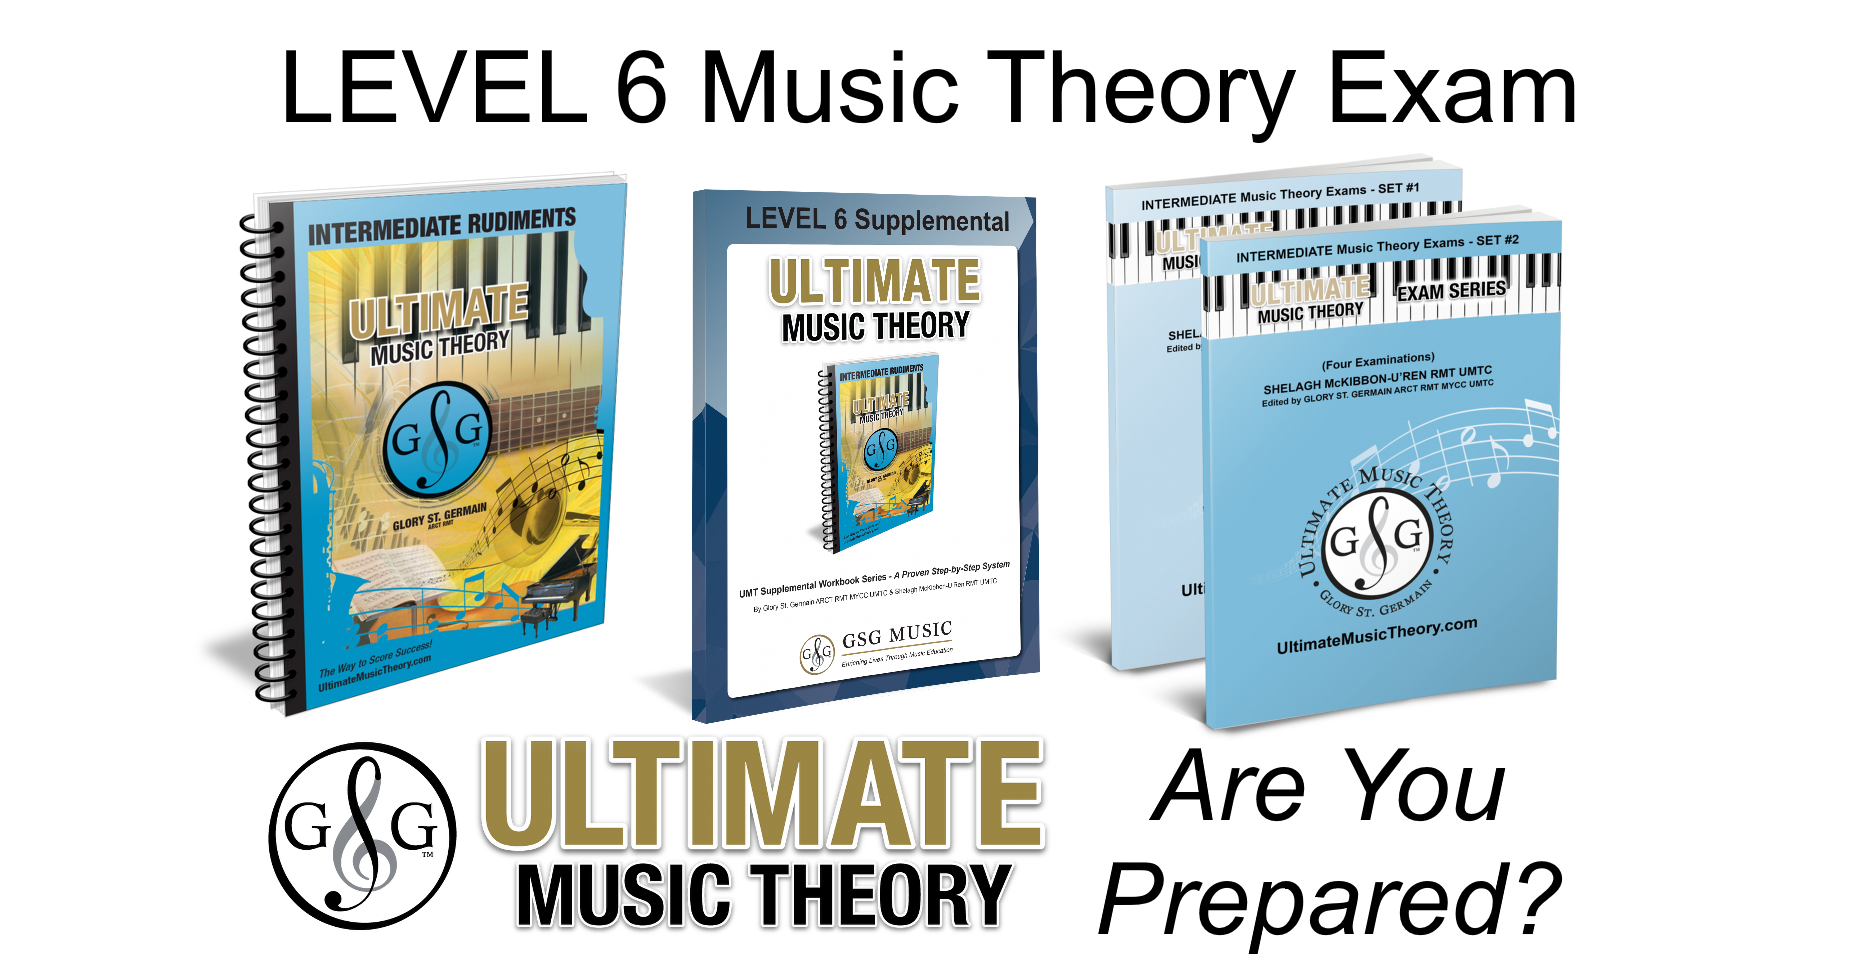 Theory: Level 6  The Royal Conservatory of Music